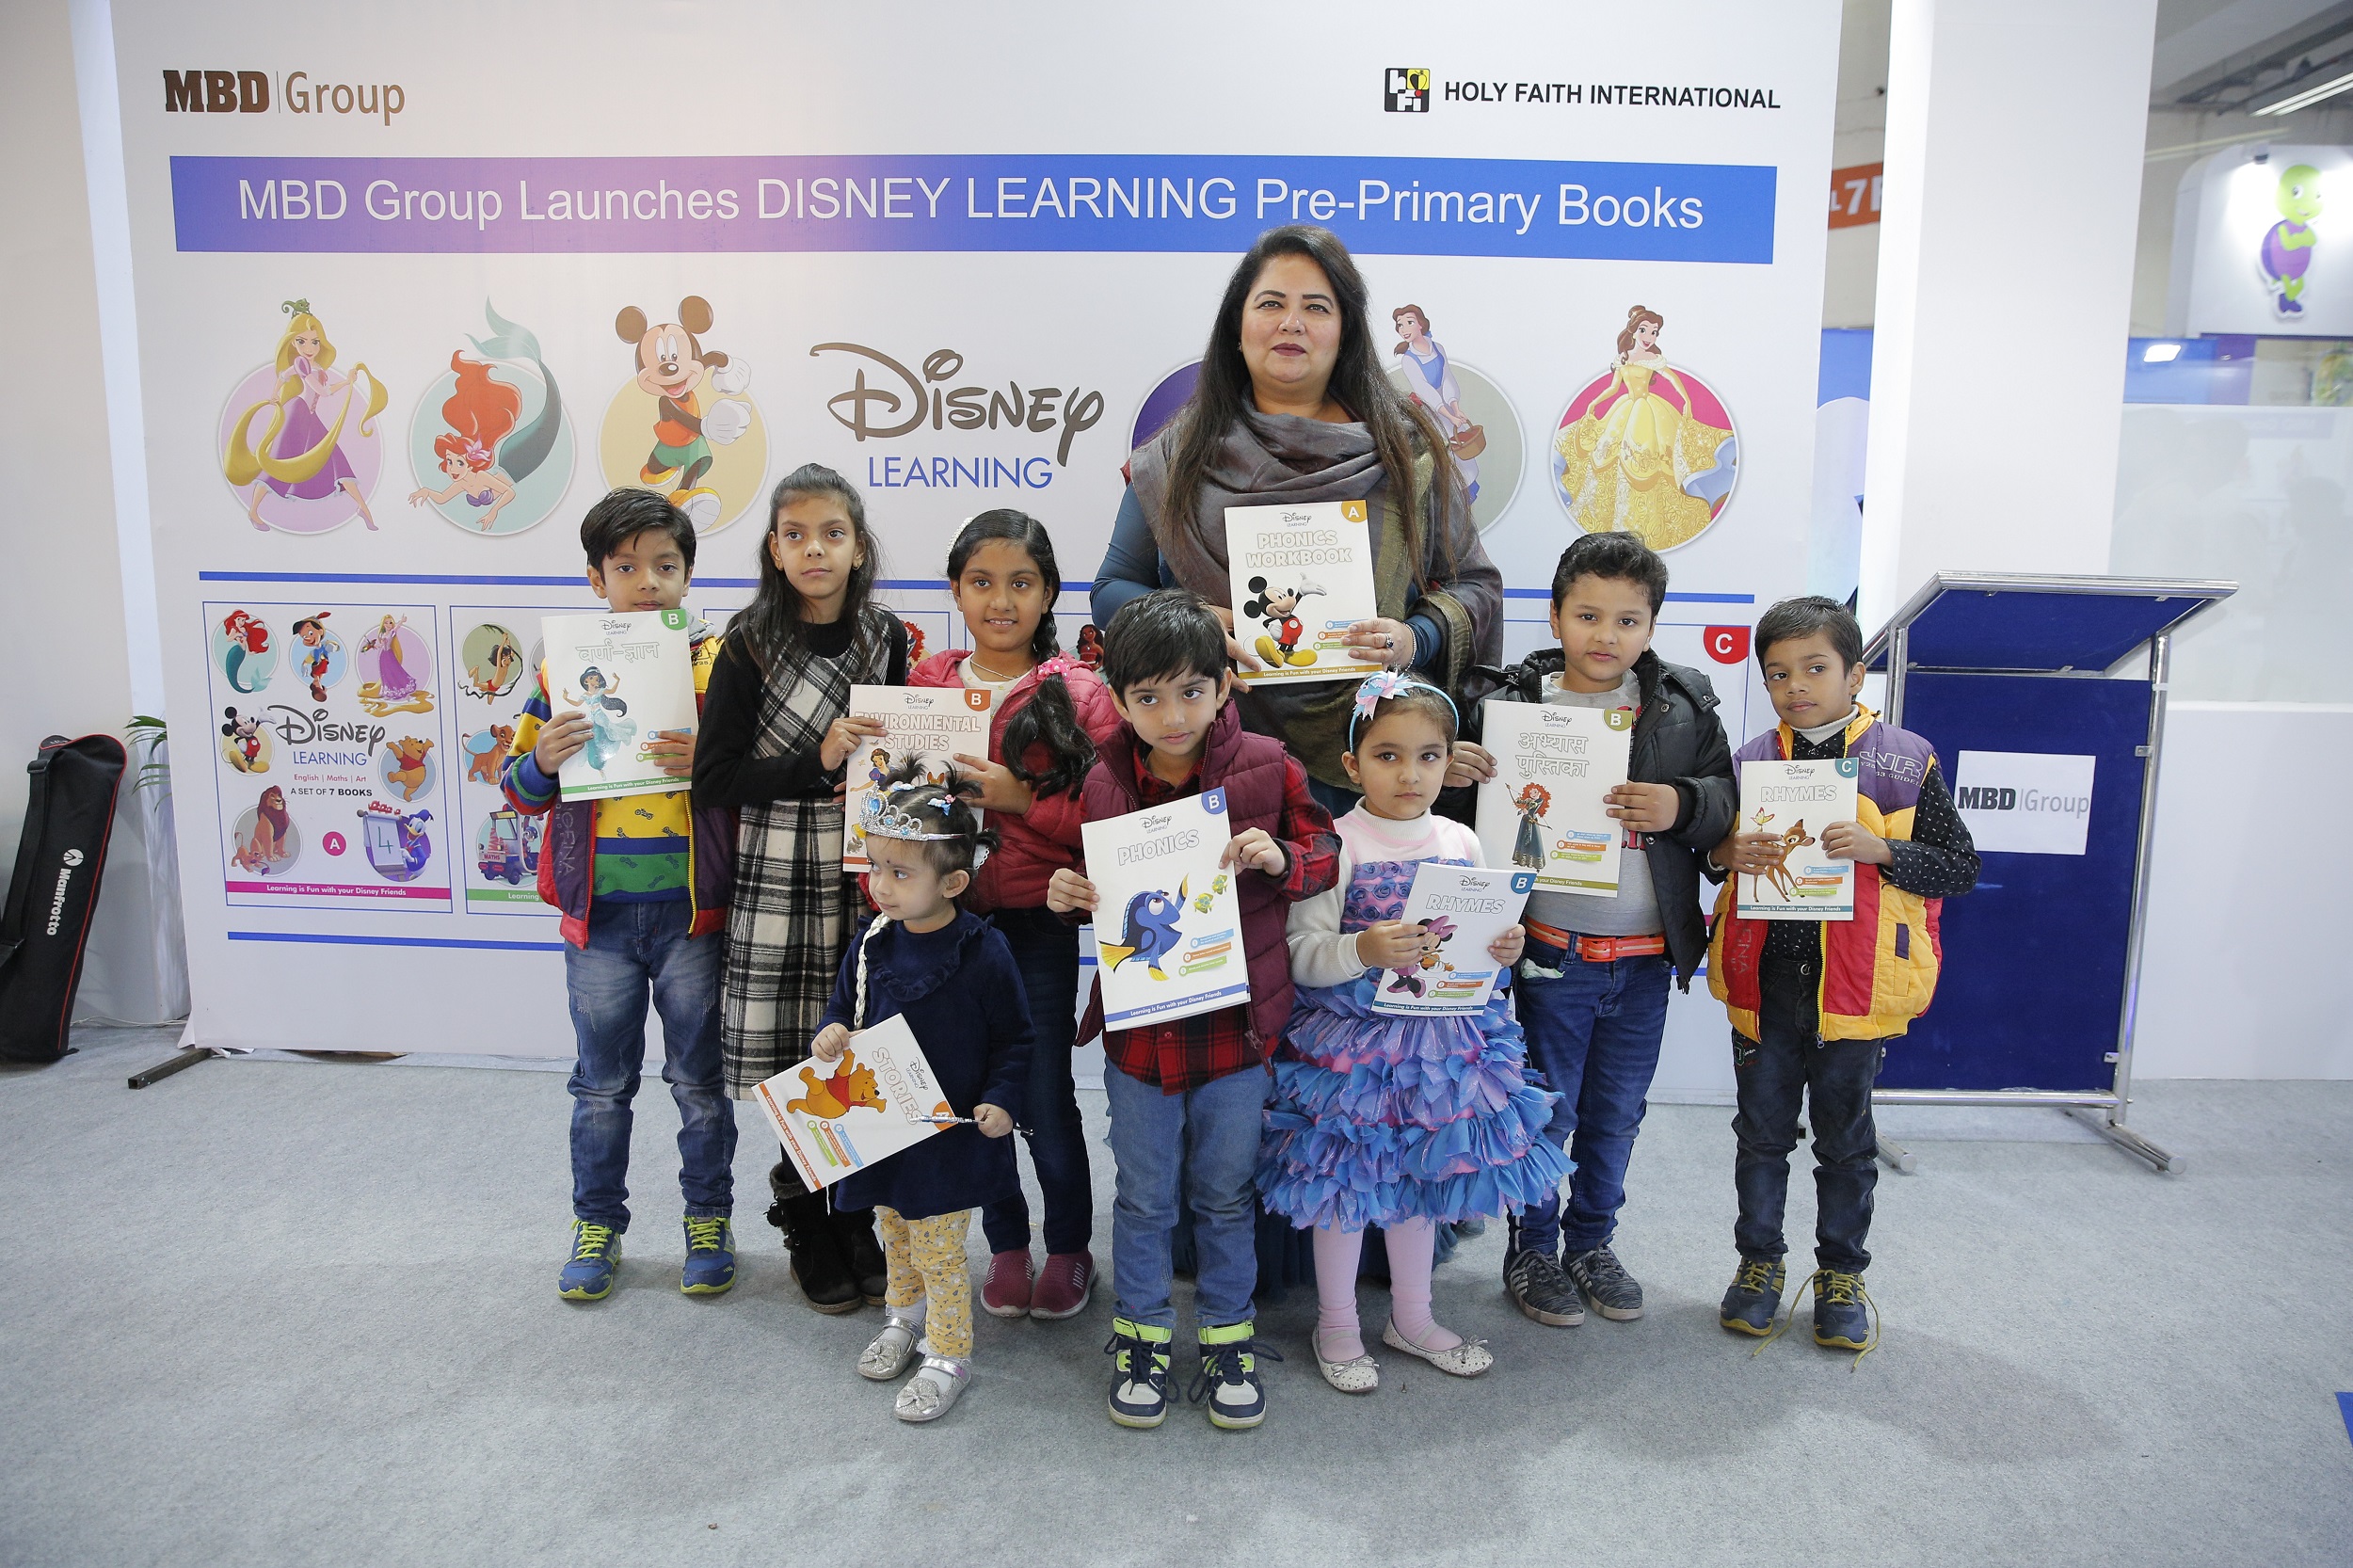 MBD Group launches pre-primary books featuring Disney themes